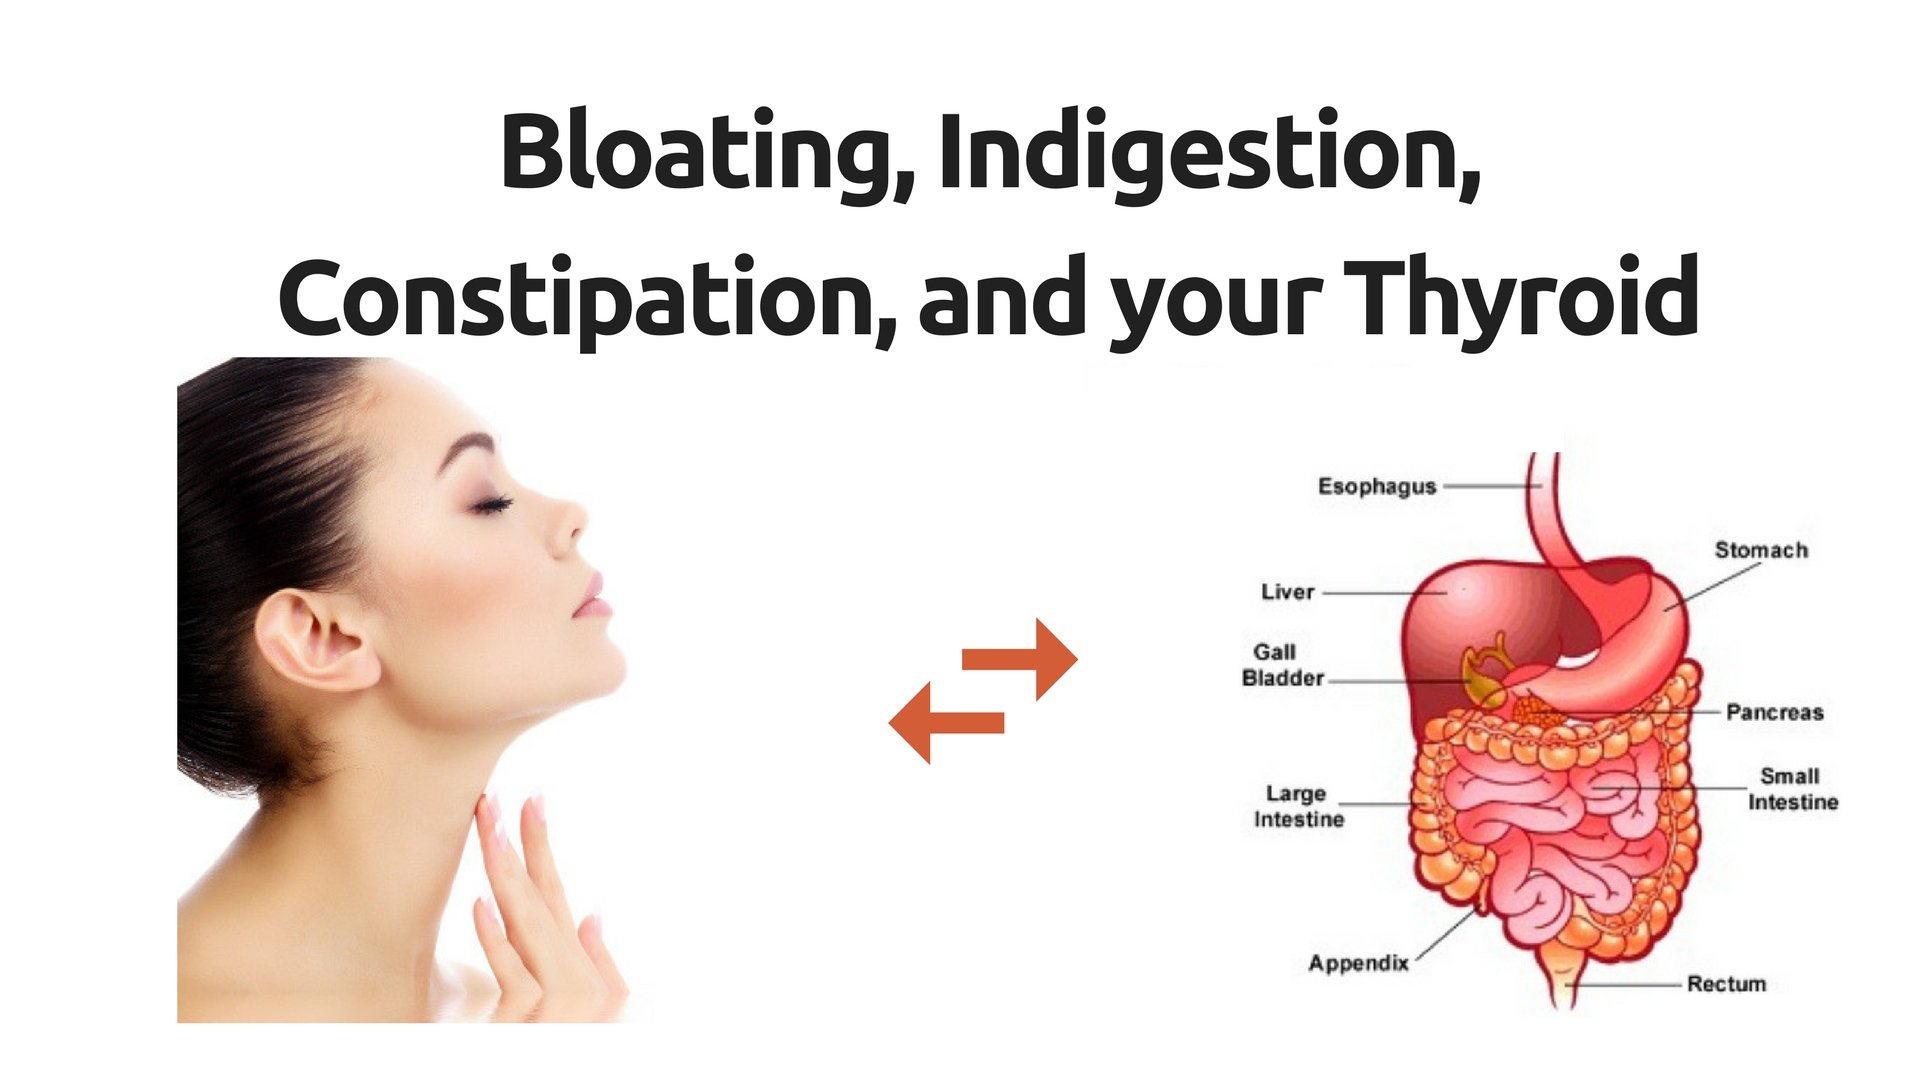 Bloating, Indigestion, Constipation, and Thyroid